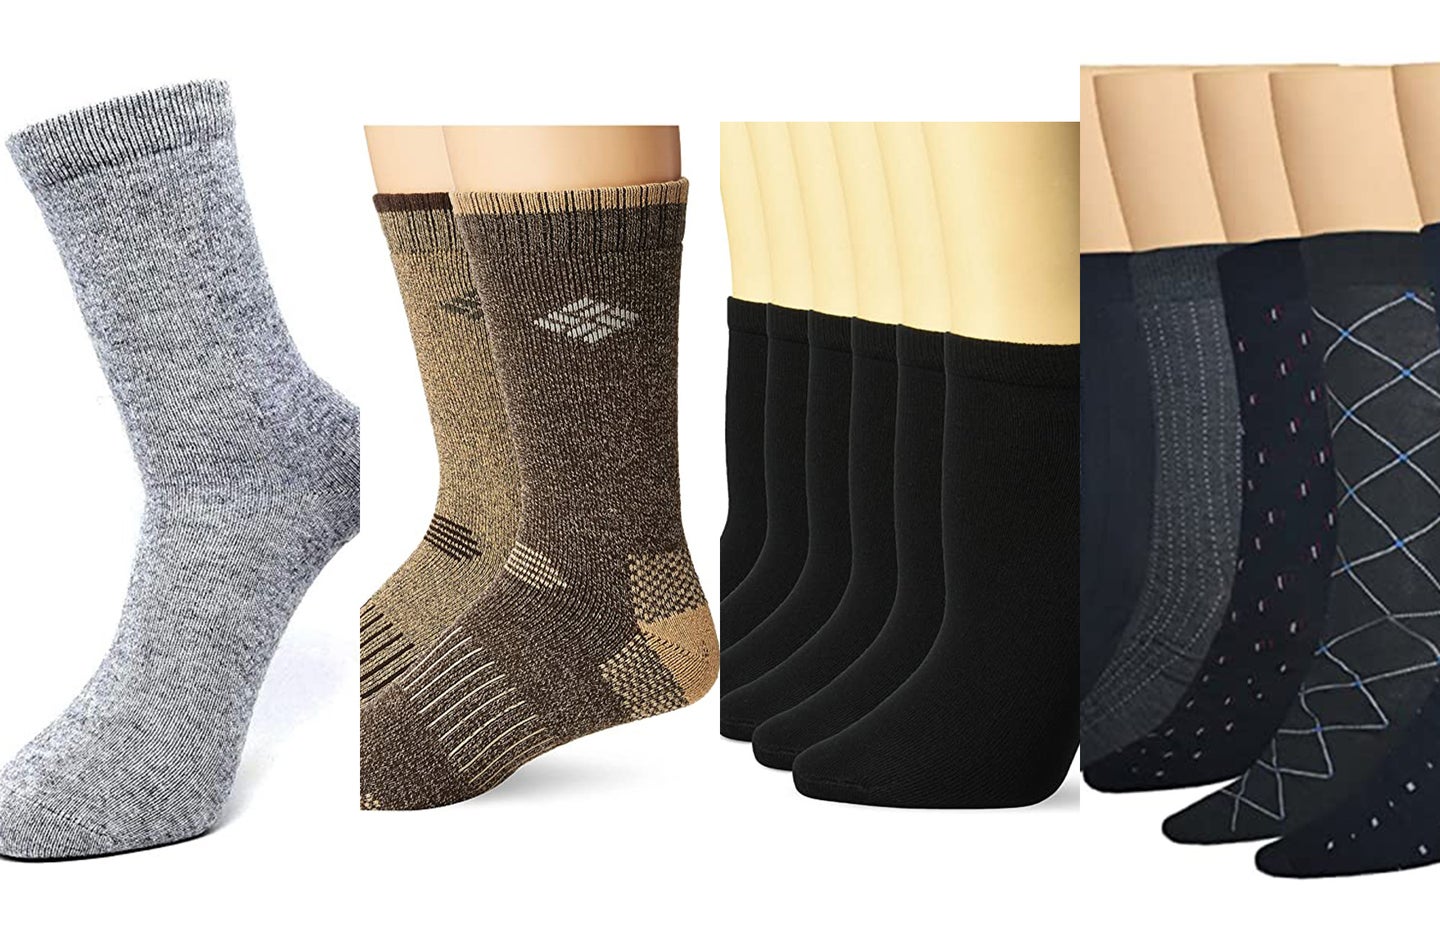 A lineup of socks on a white background